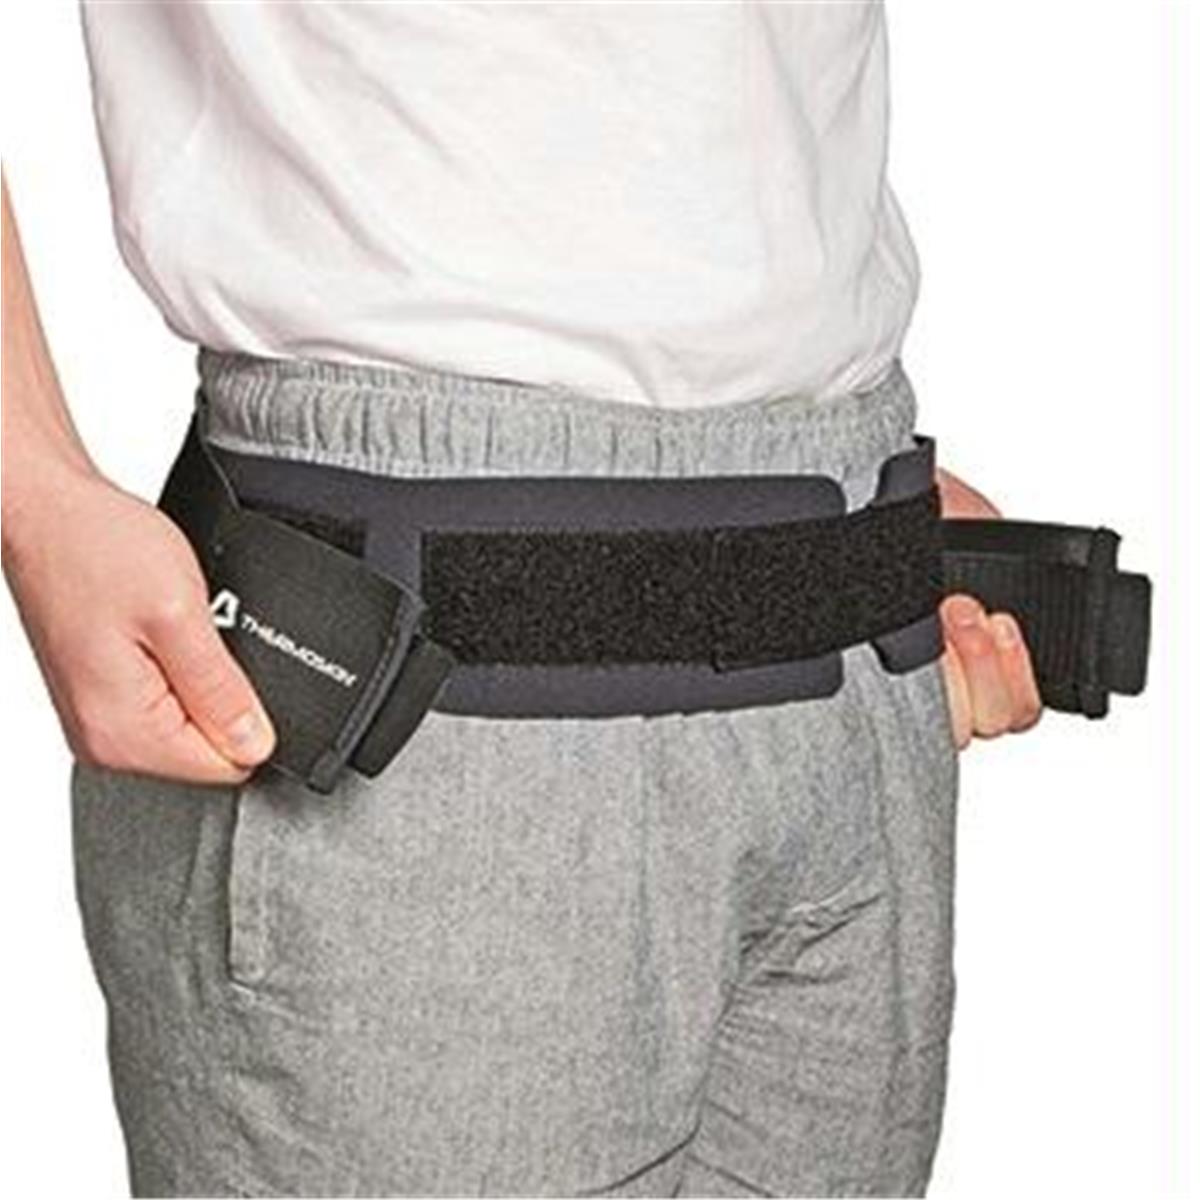 Picture of Orthozone 609580871125 Thermoskin Sacroiliac Belt - 2XL